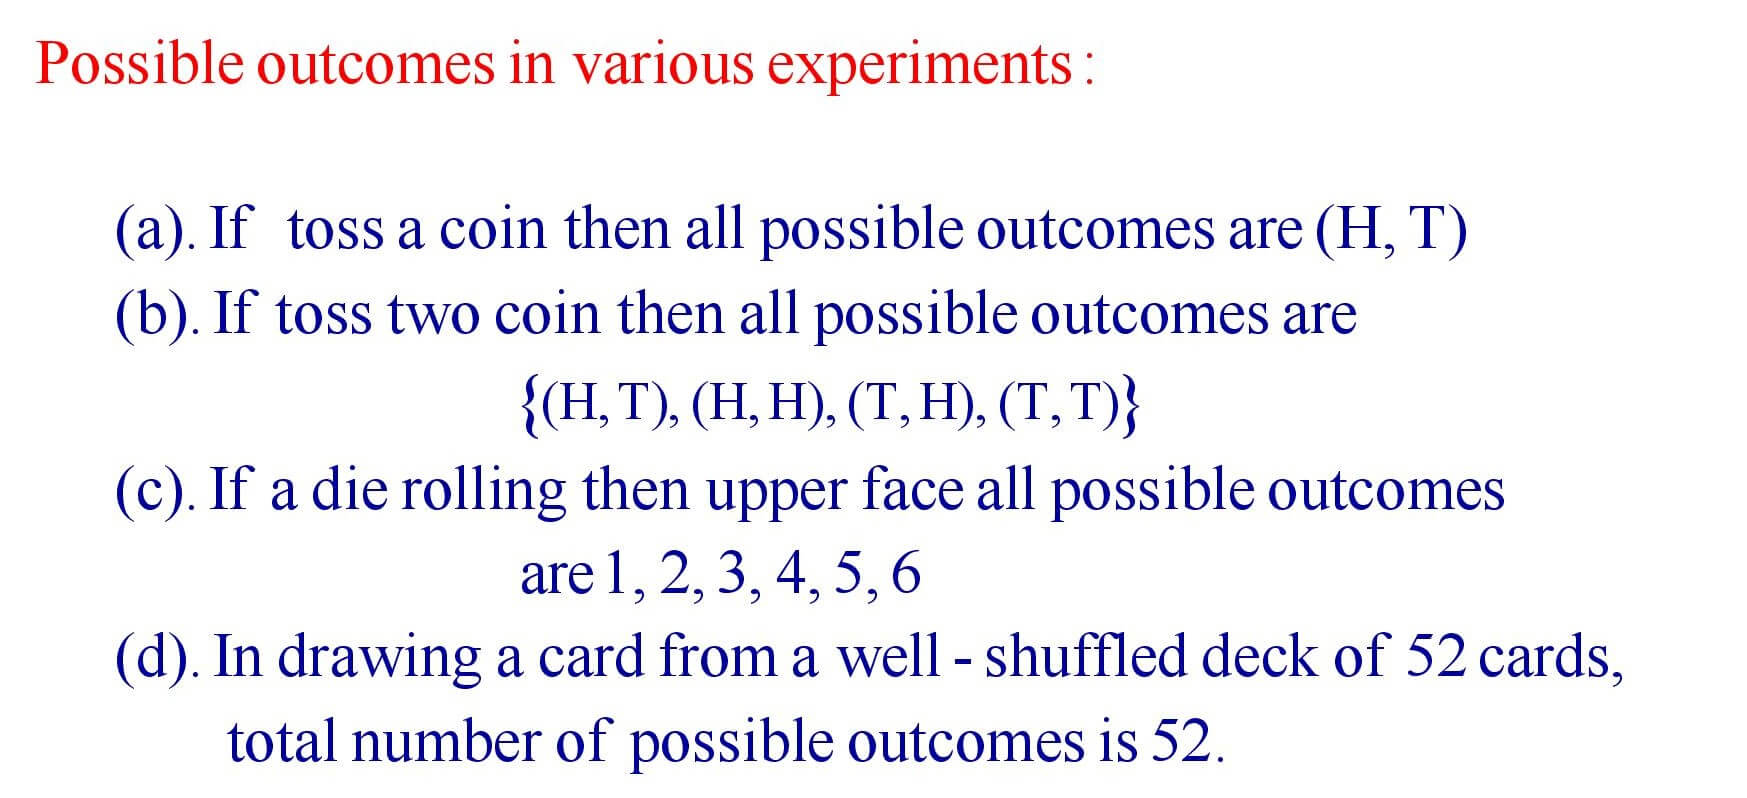 Possible outcomes in various experiments